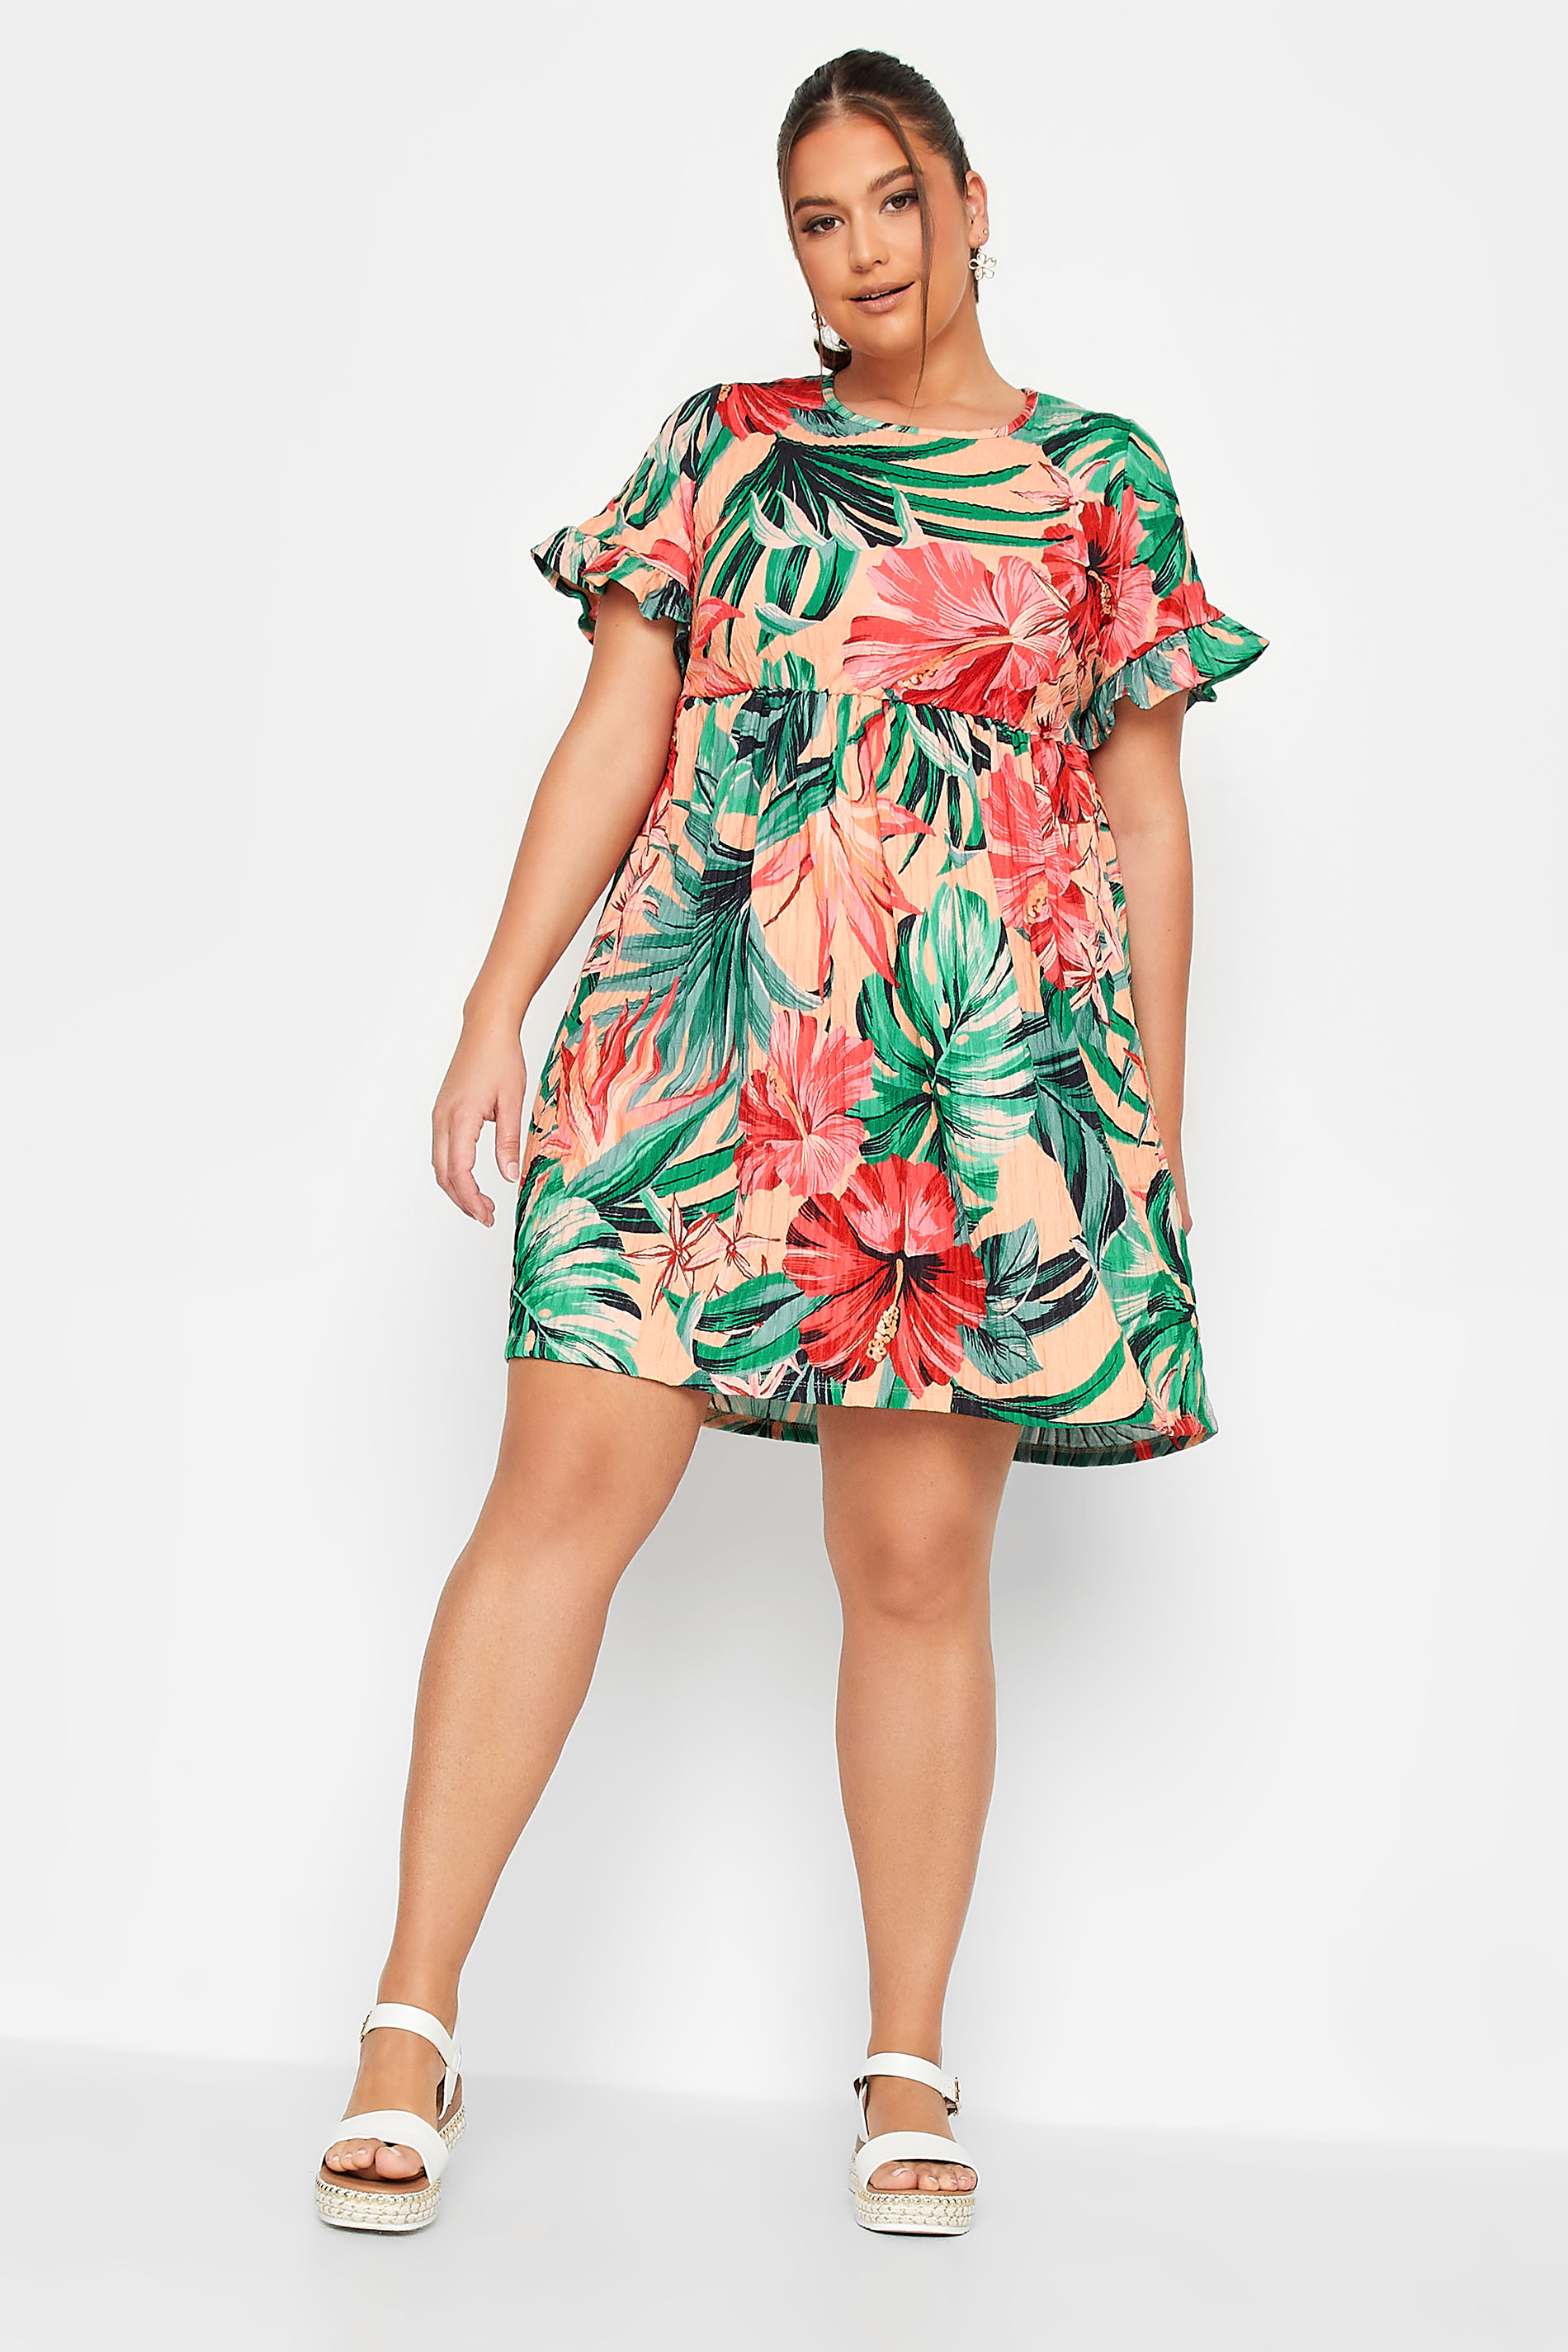 YOURS Curve Plus Size Green & Peach Tropical Floral Print Smock Tunic Dress